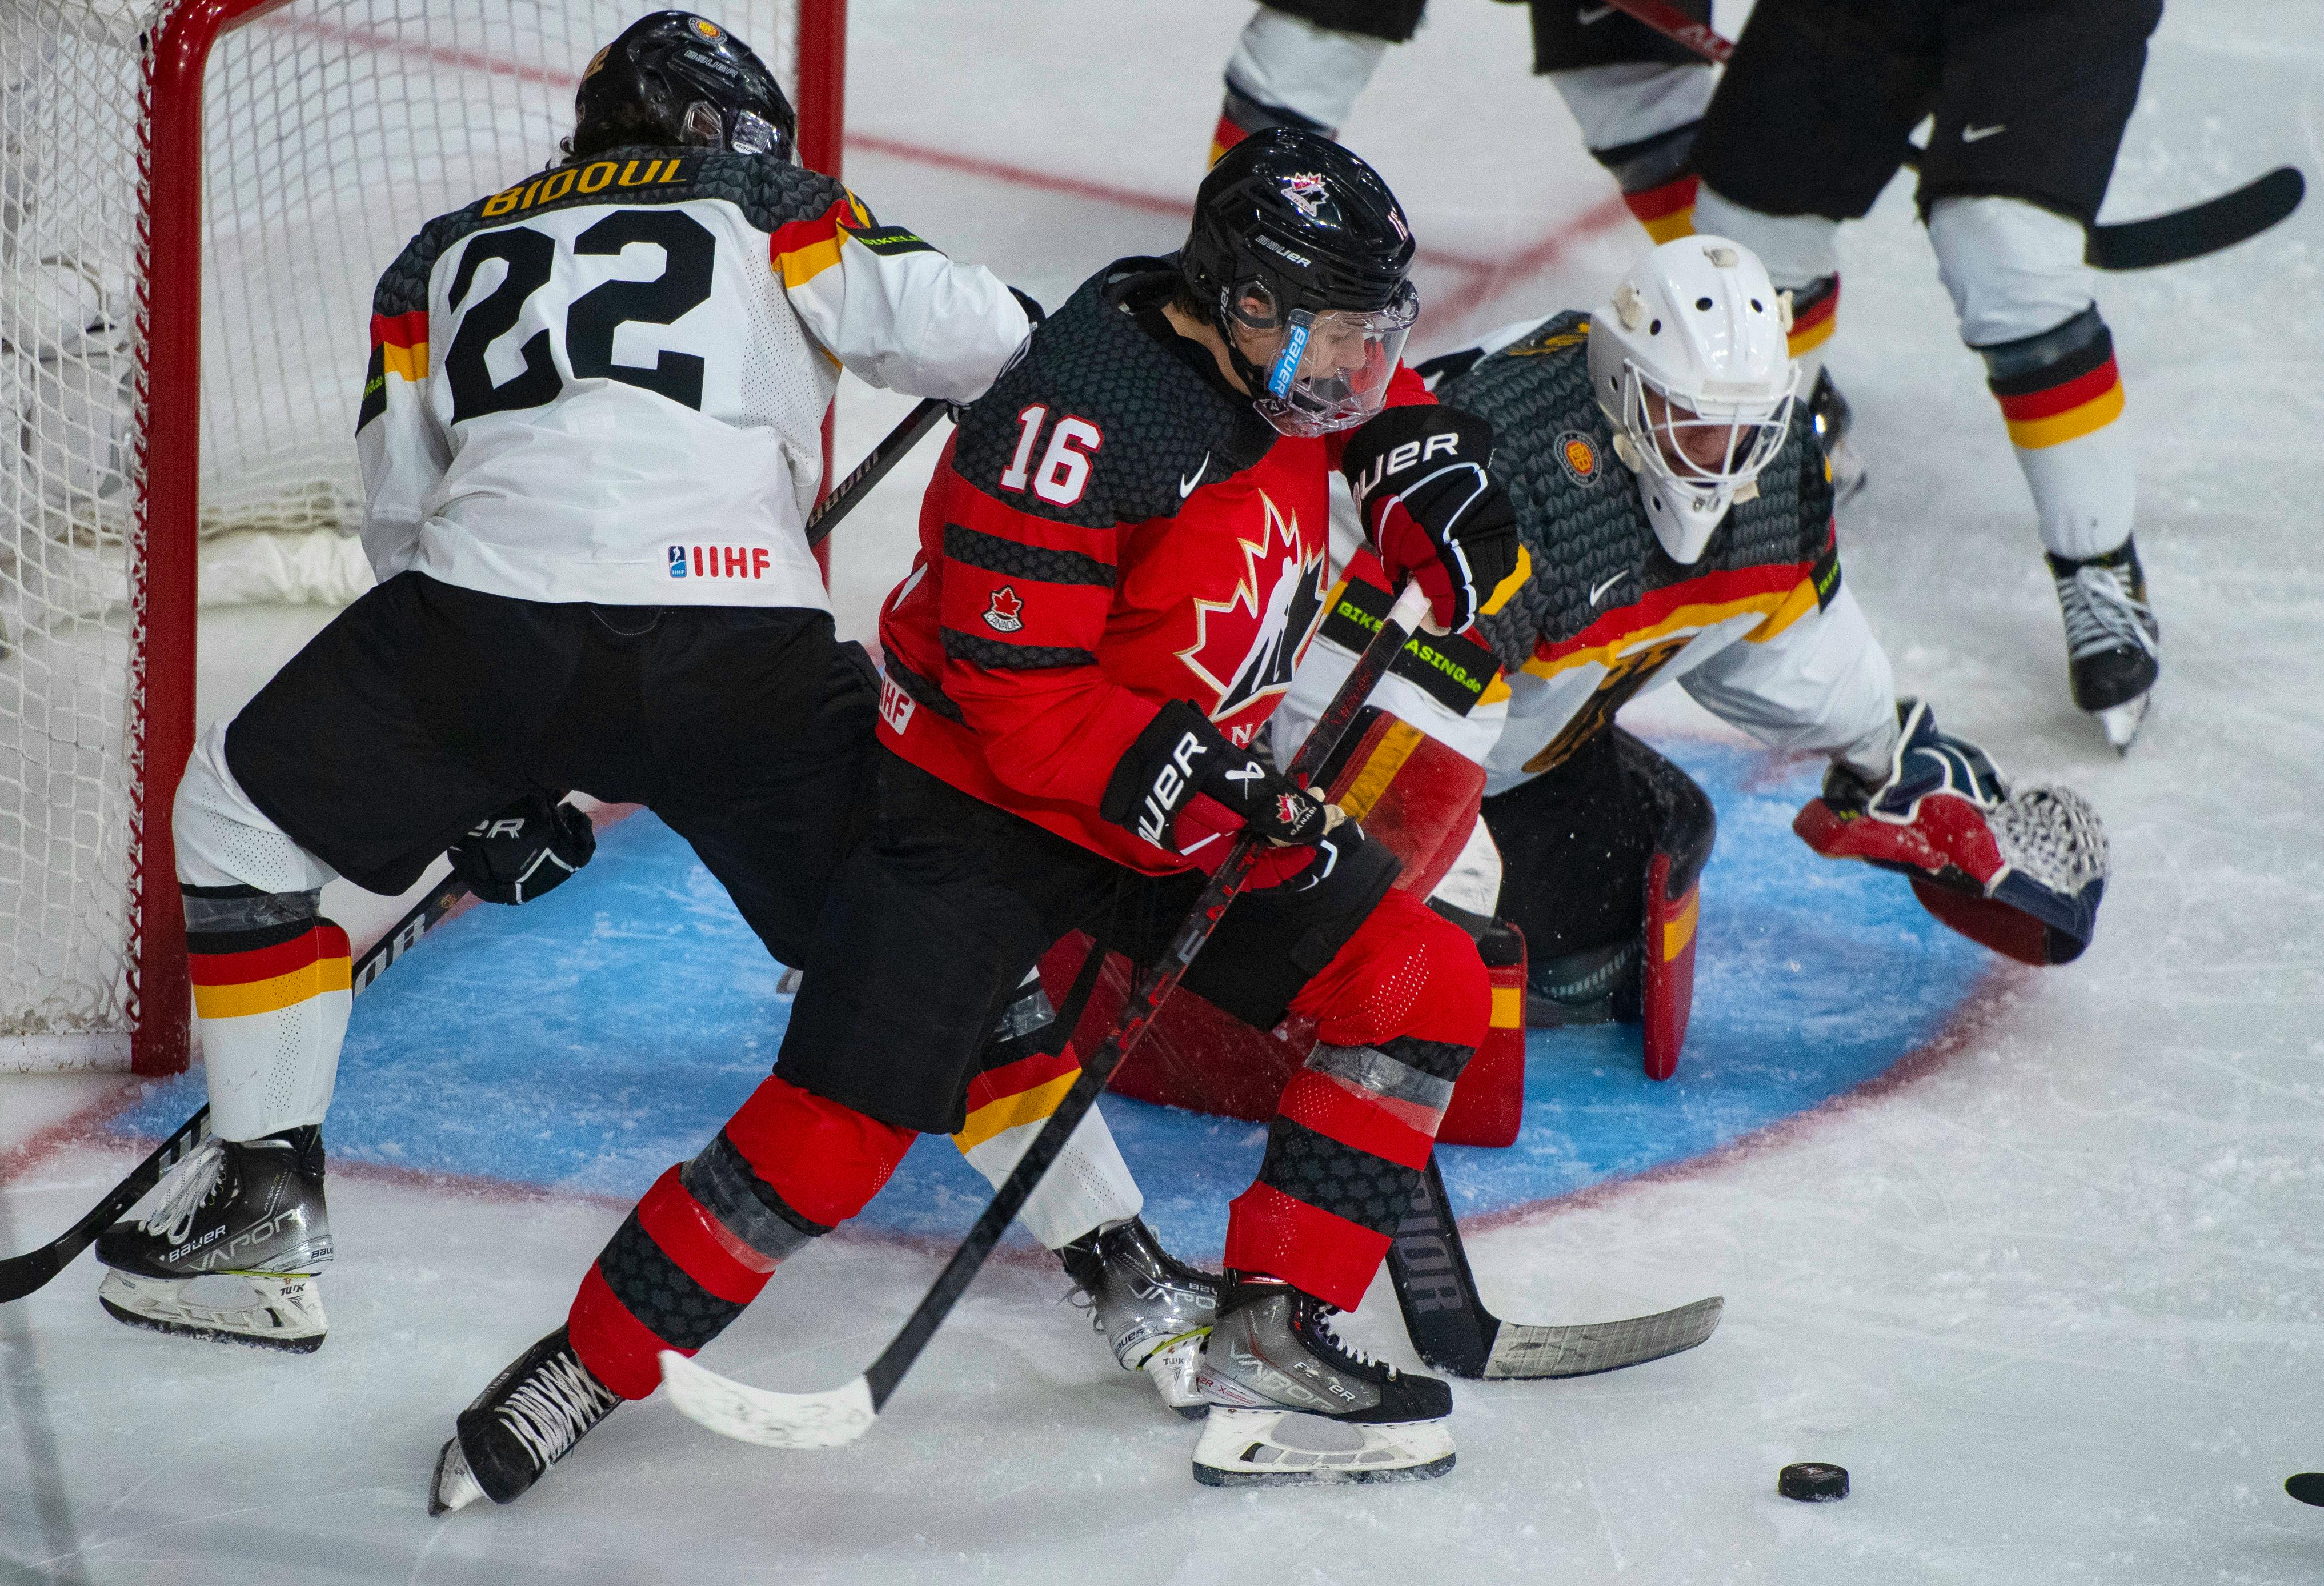 Bedard's seven points helps Canada get back on track at world juniors